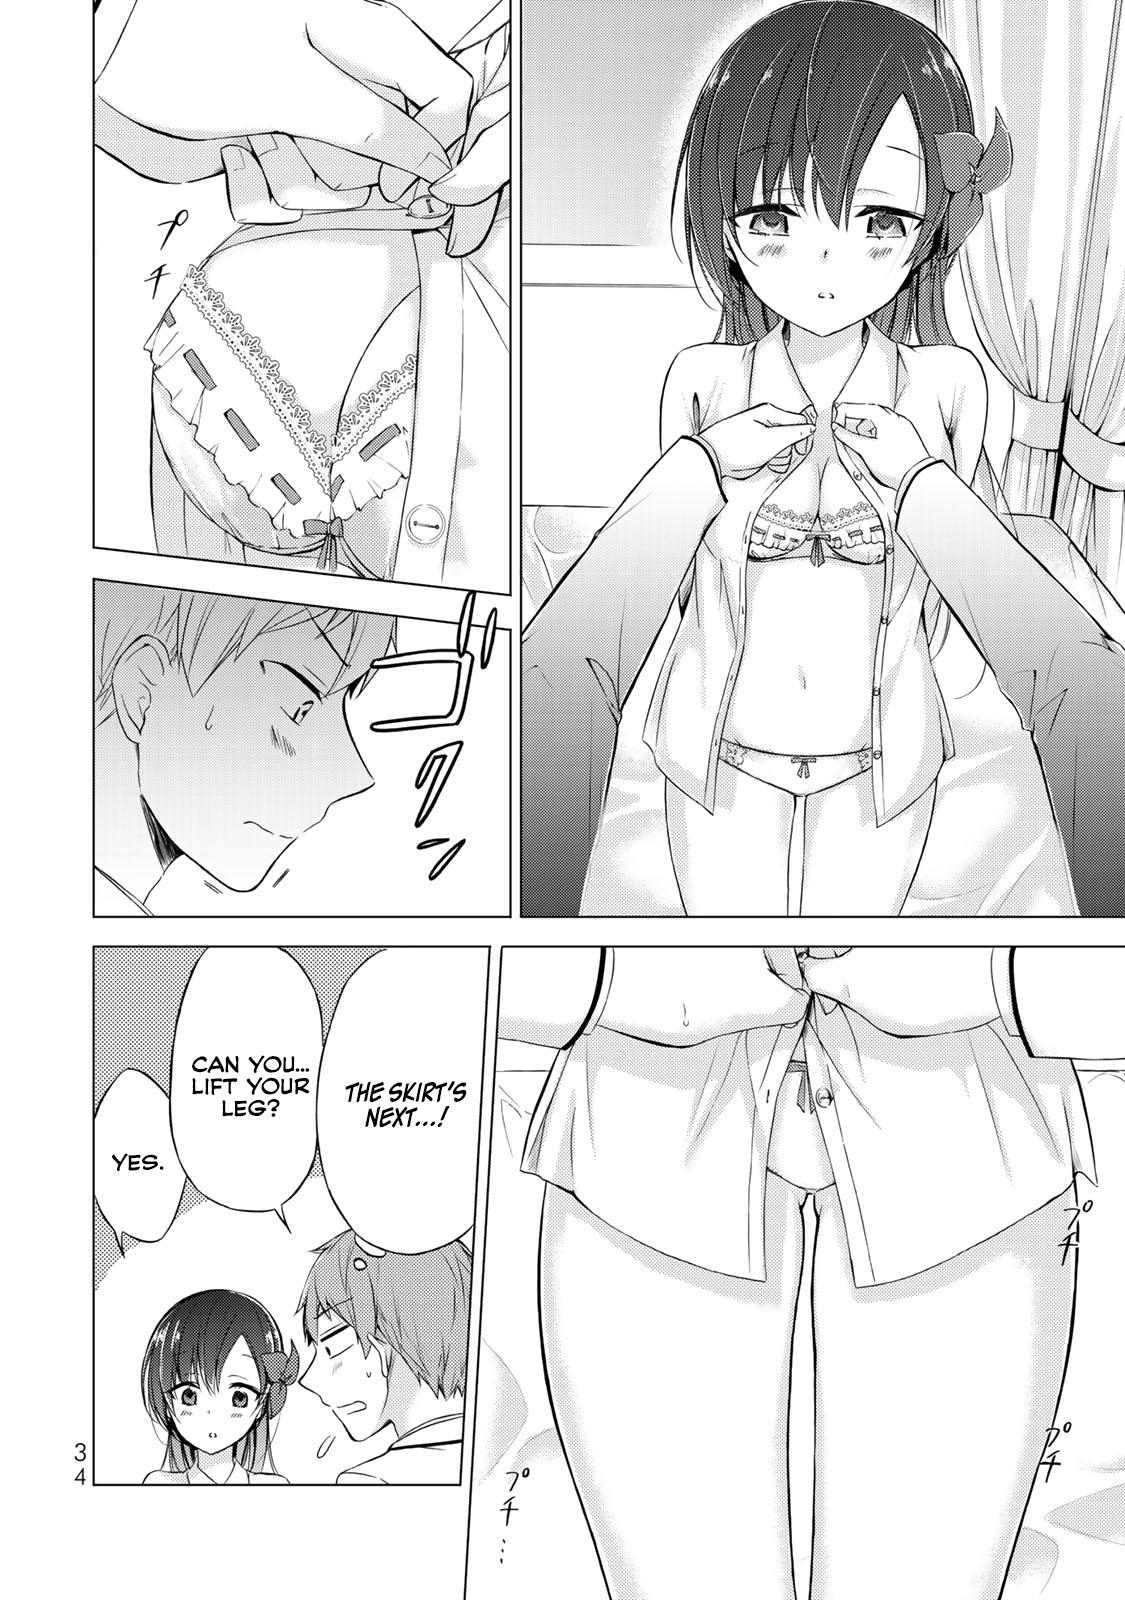 The Student Council President Solves Everything on the Bed Vol. 1 Ch. 1 The secret of the student council president